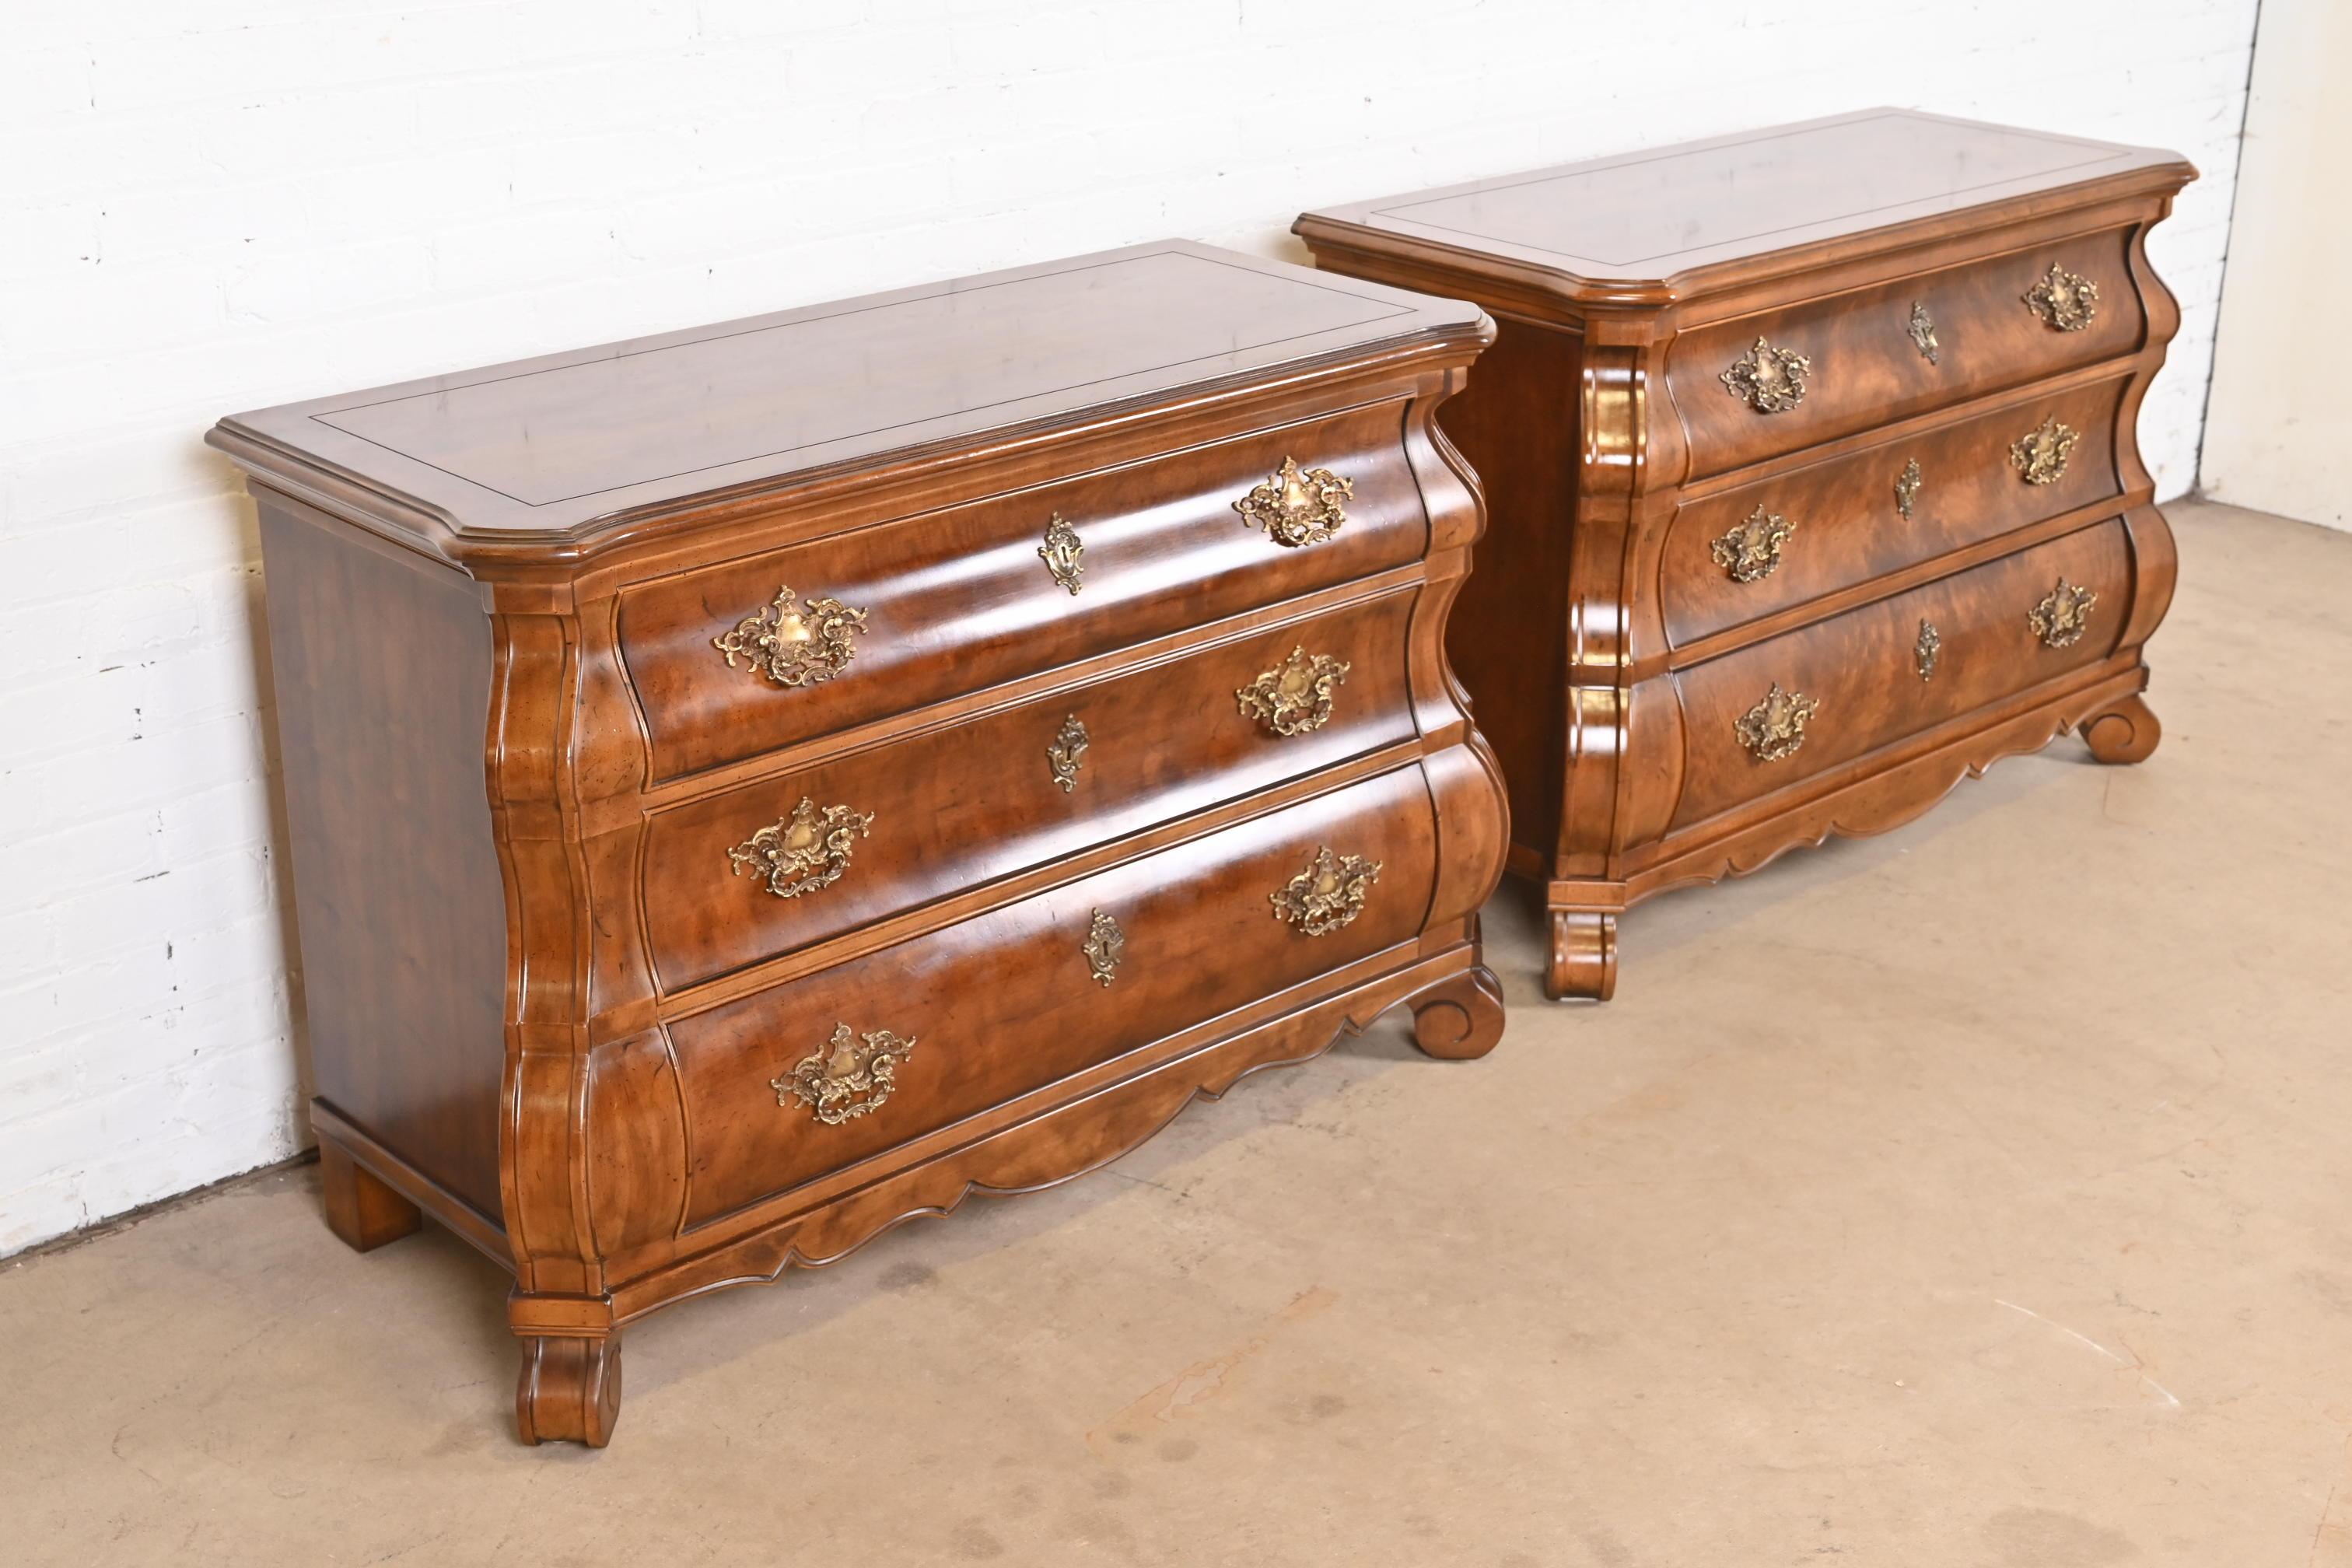 Henredon Italian Baroque Burled Mahogany Bombay Chests or Commodes, Pair For Sale 1